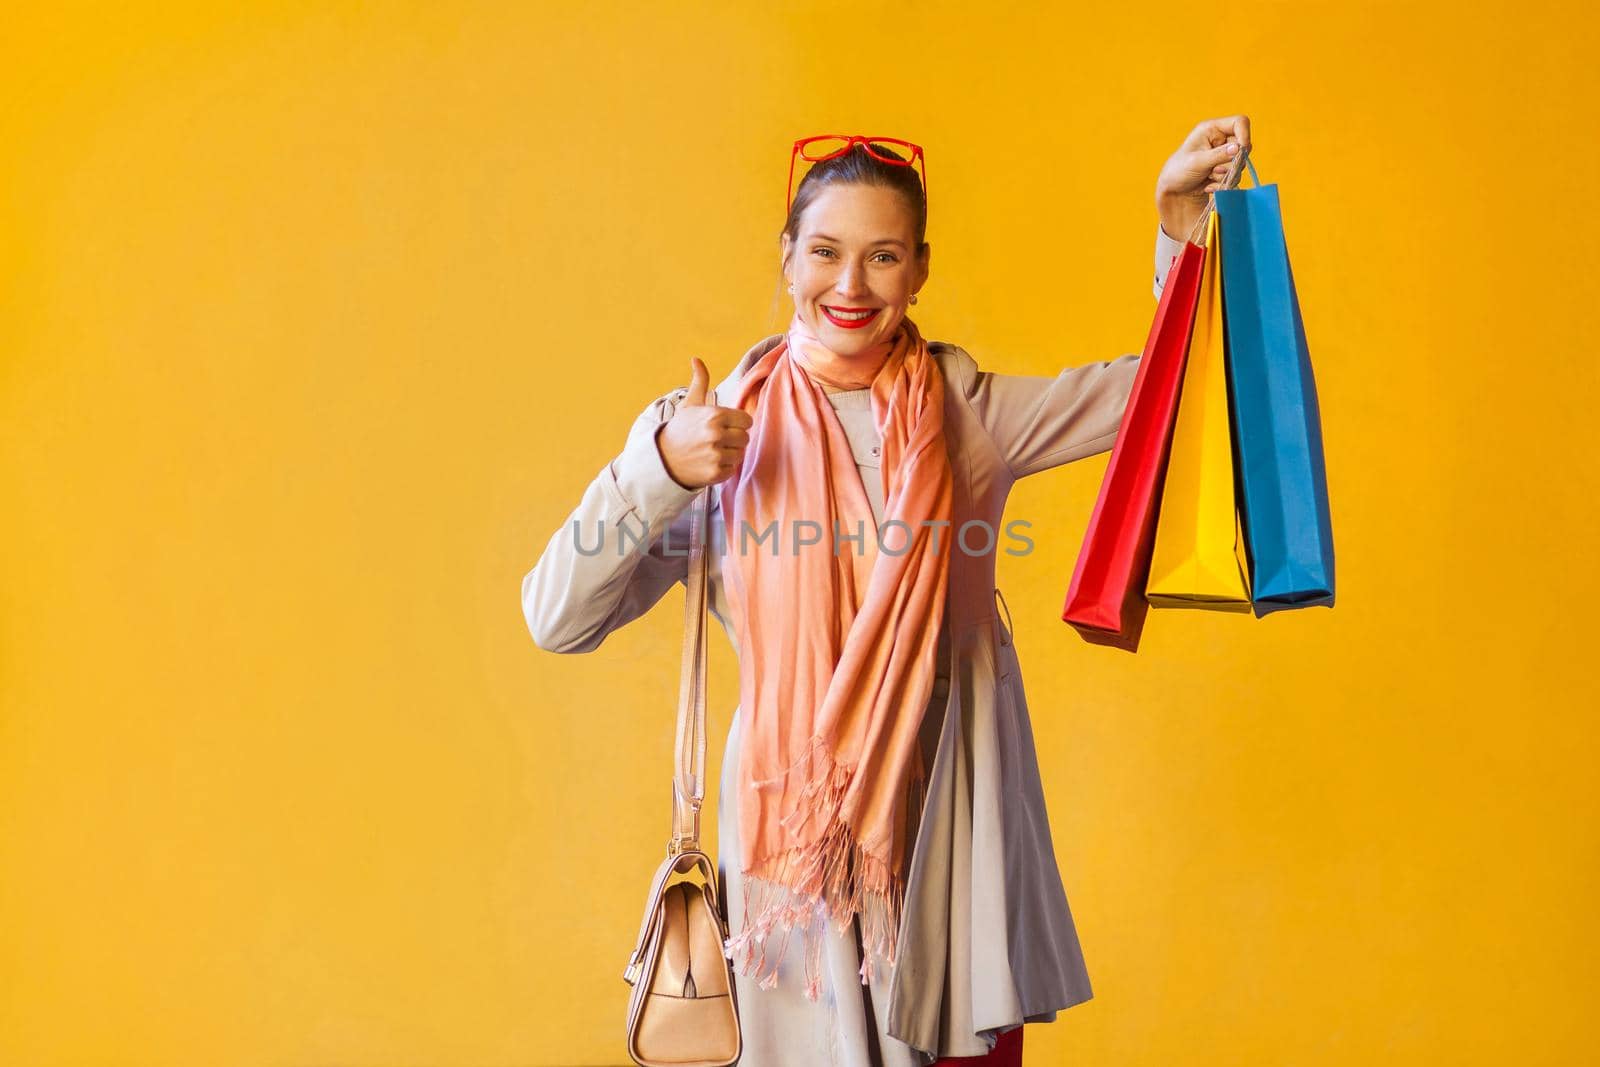 Happy cheerful young adult girl with freckles, bun hair, looking at camera, thumbs up finger, holding many shopping bag, having joyful look, enjoying good day and free time indoors. Studio shot